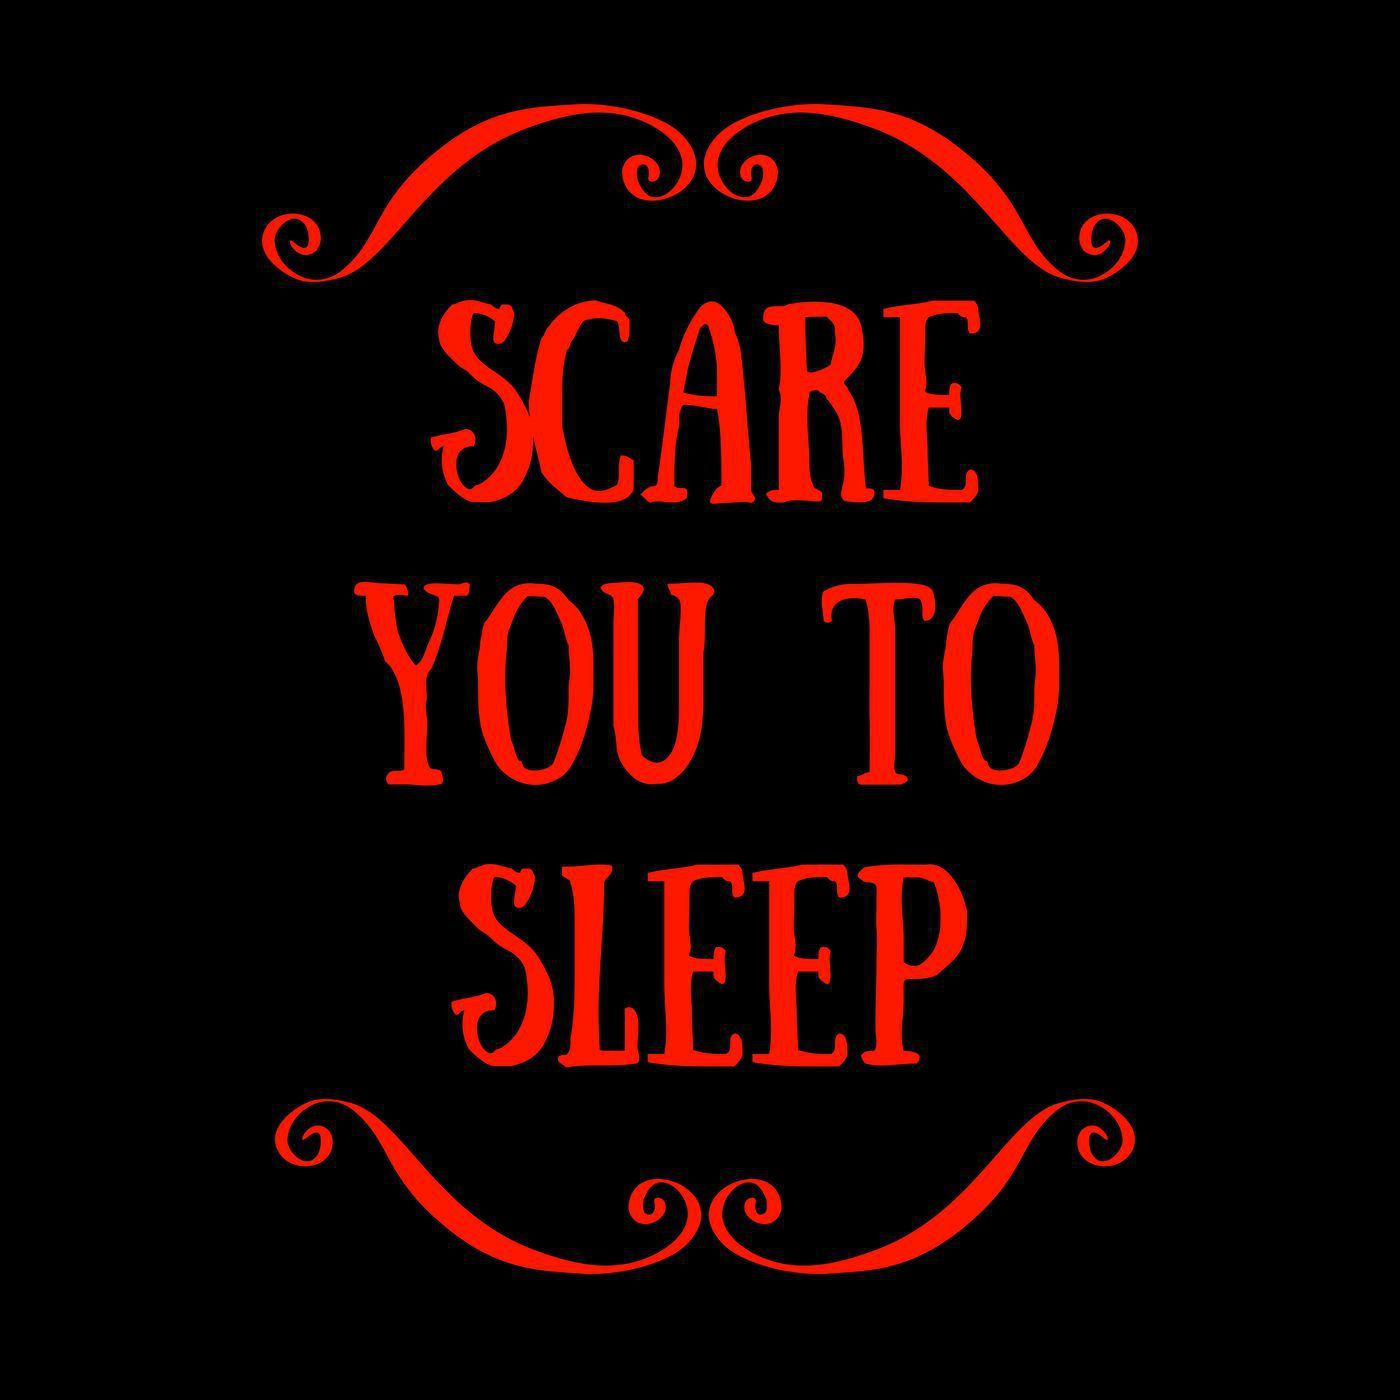 The Scare You to Sleep logo, featuring the show name in red on a black background, with scrollwork above and below.